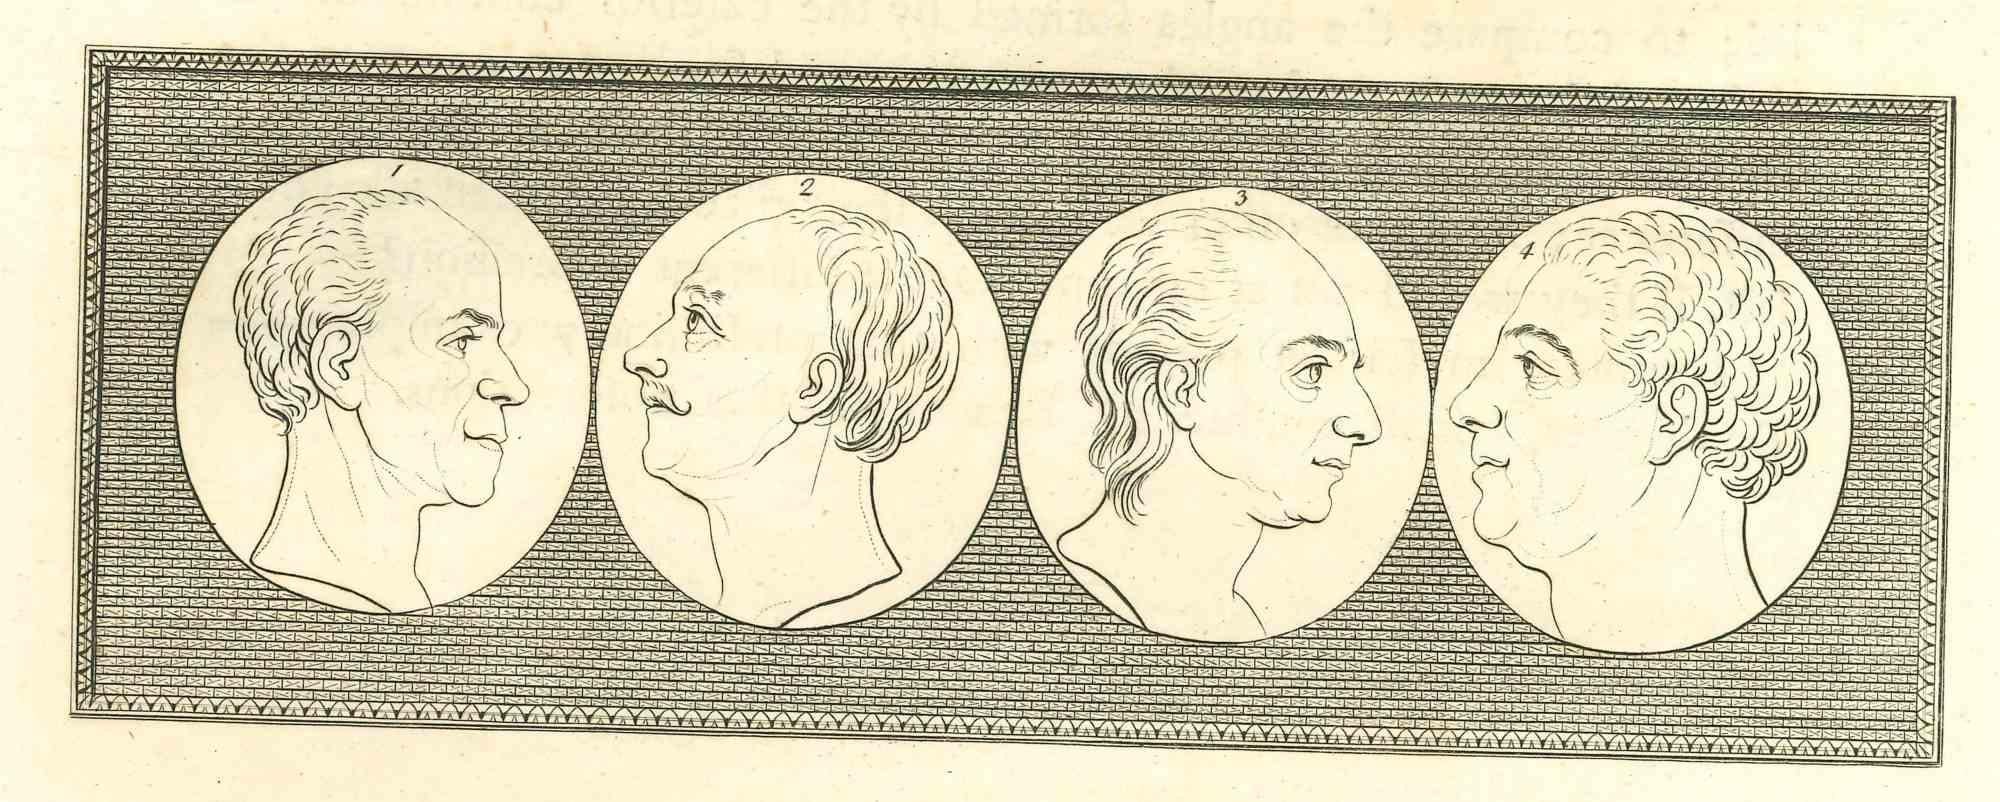 Heads of men is an original artwork realized by Thomas Holloway for Johann Caspar Lavater's  "Essays on Physiognomy, Designed to promote the Knowledge and the Love of Mankind", London, Bensley, 1810. 

 This artwork portrays heads of men. On the